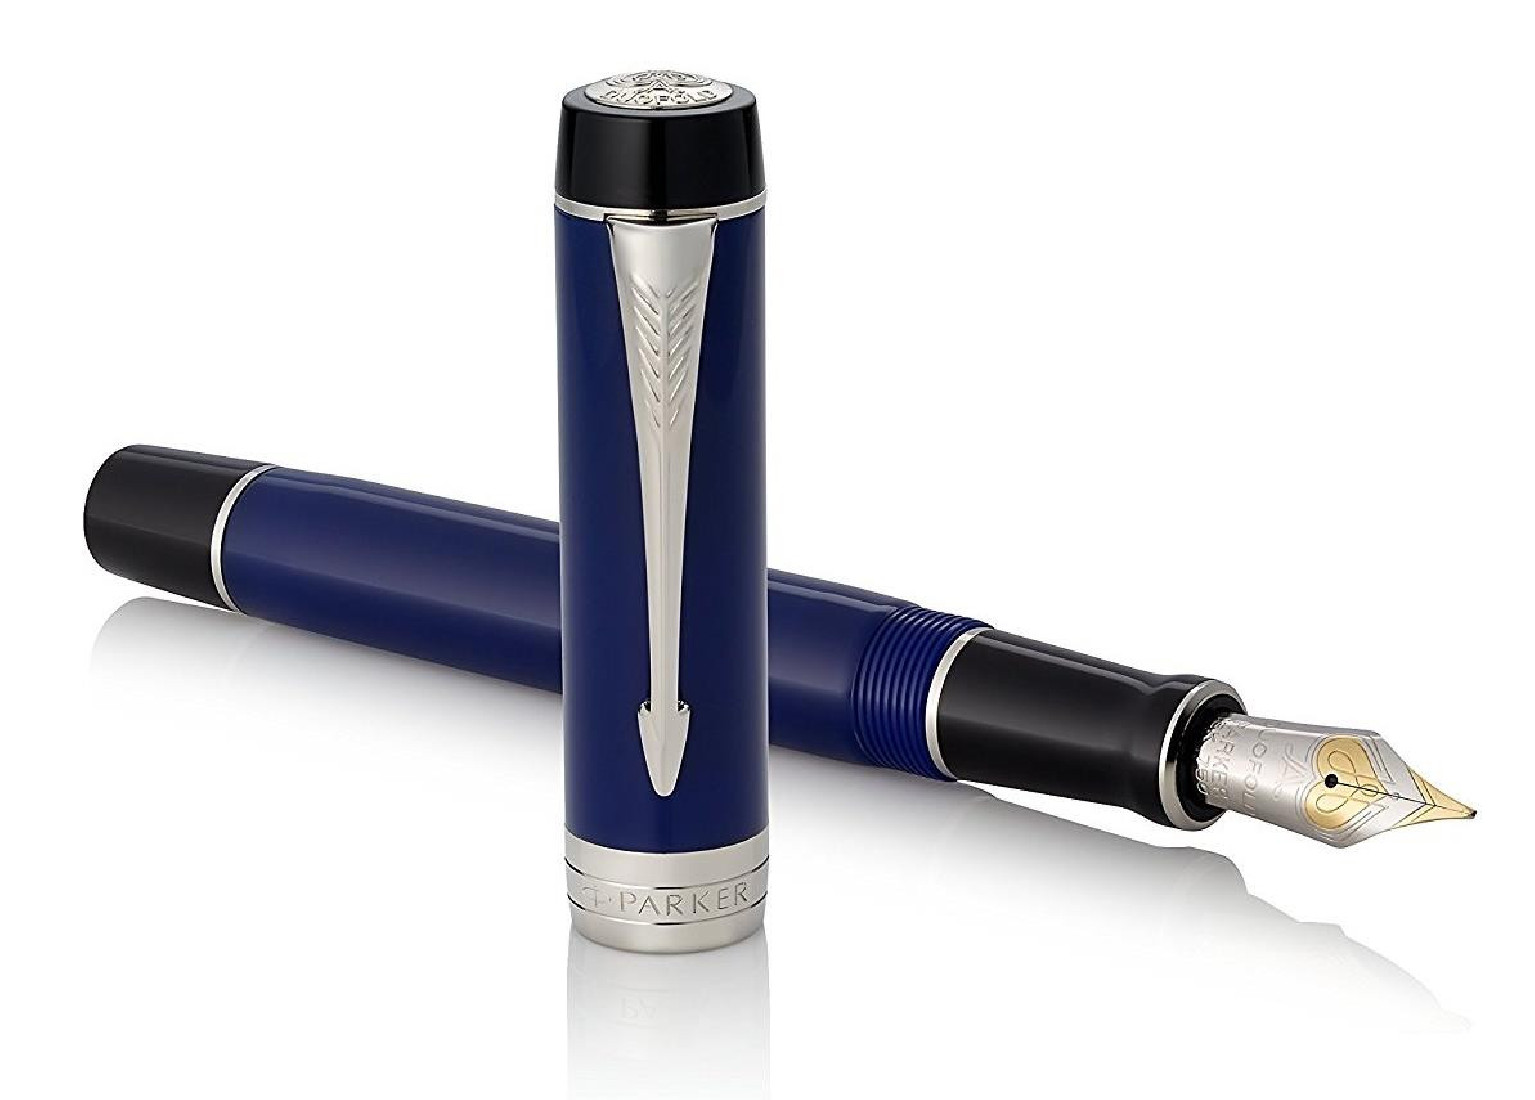 Parker Duofold Centennial Fountain Pen, Classic Blue and Black, Solid Gold Nib, Black Ink and Convertor (1947983)